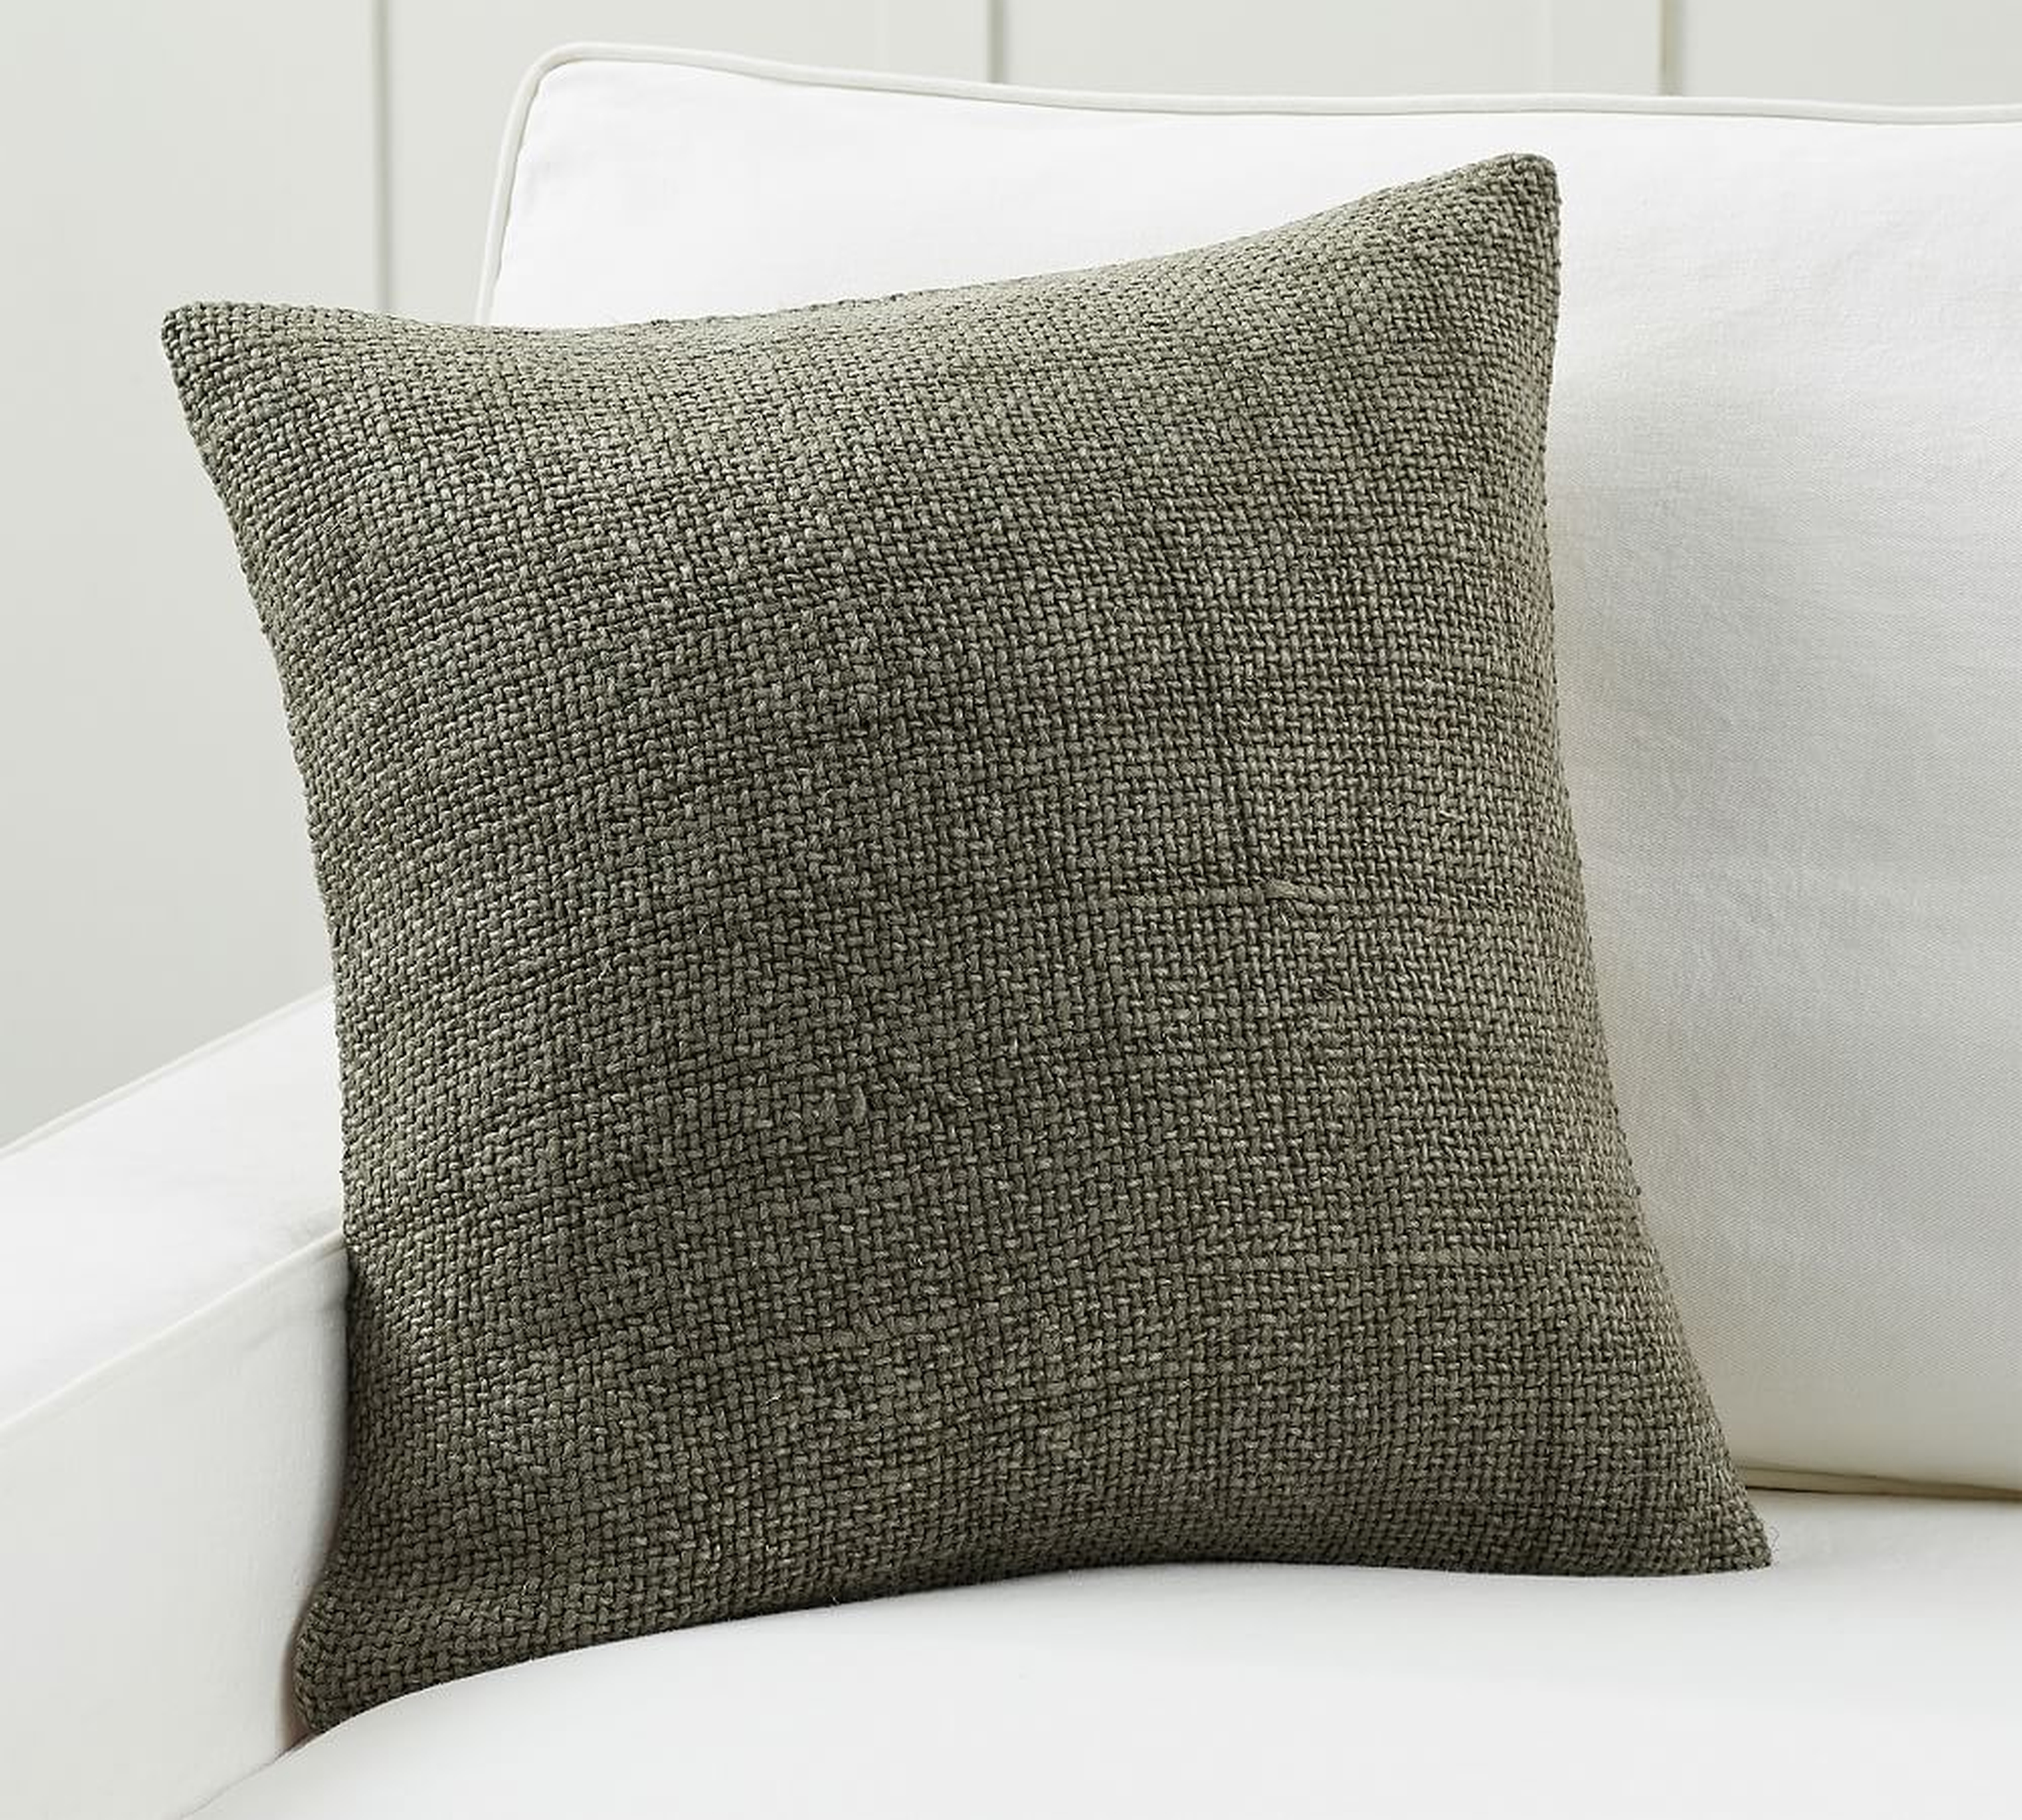 Faye Textured Linen Pillow Cover, Sage, 20" x 20" - Pottery Barn